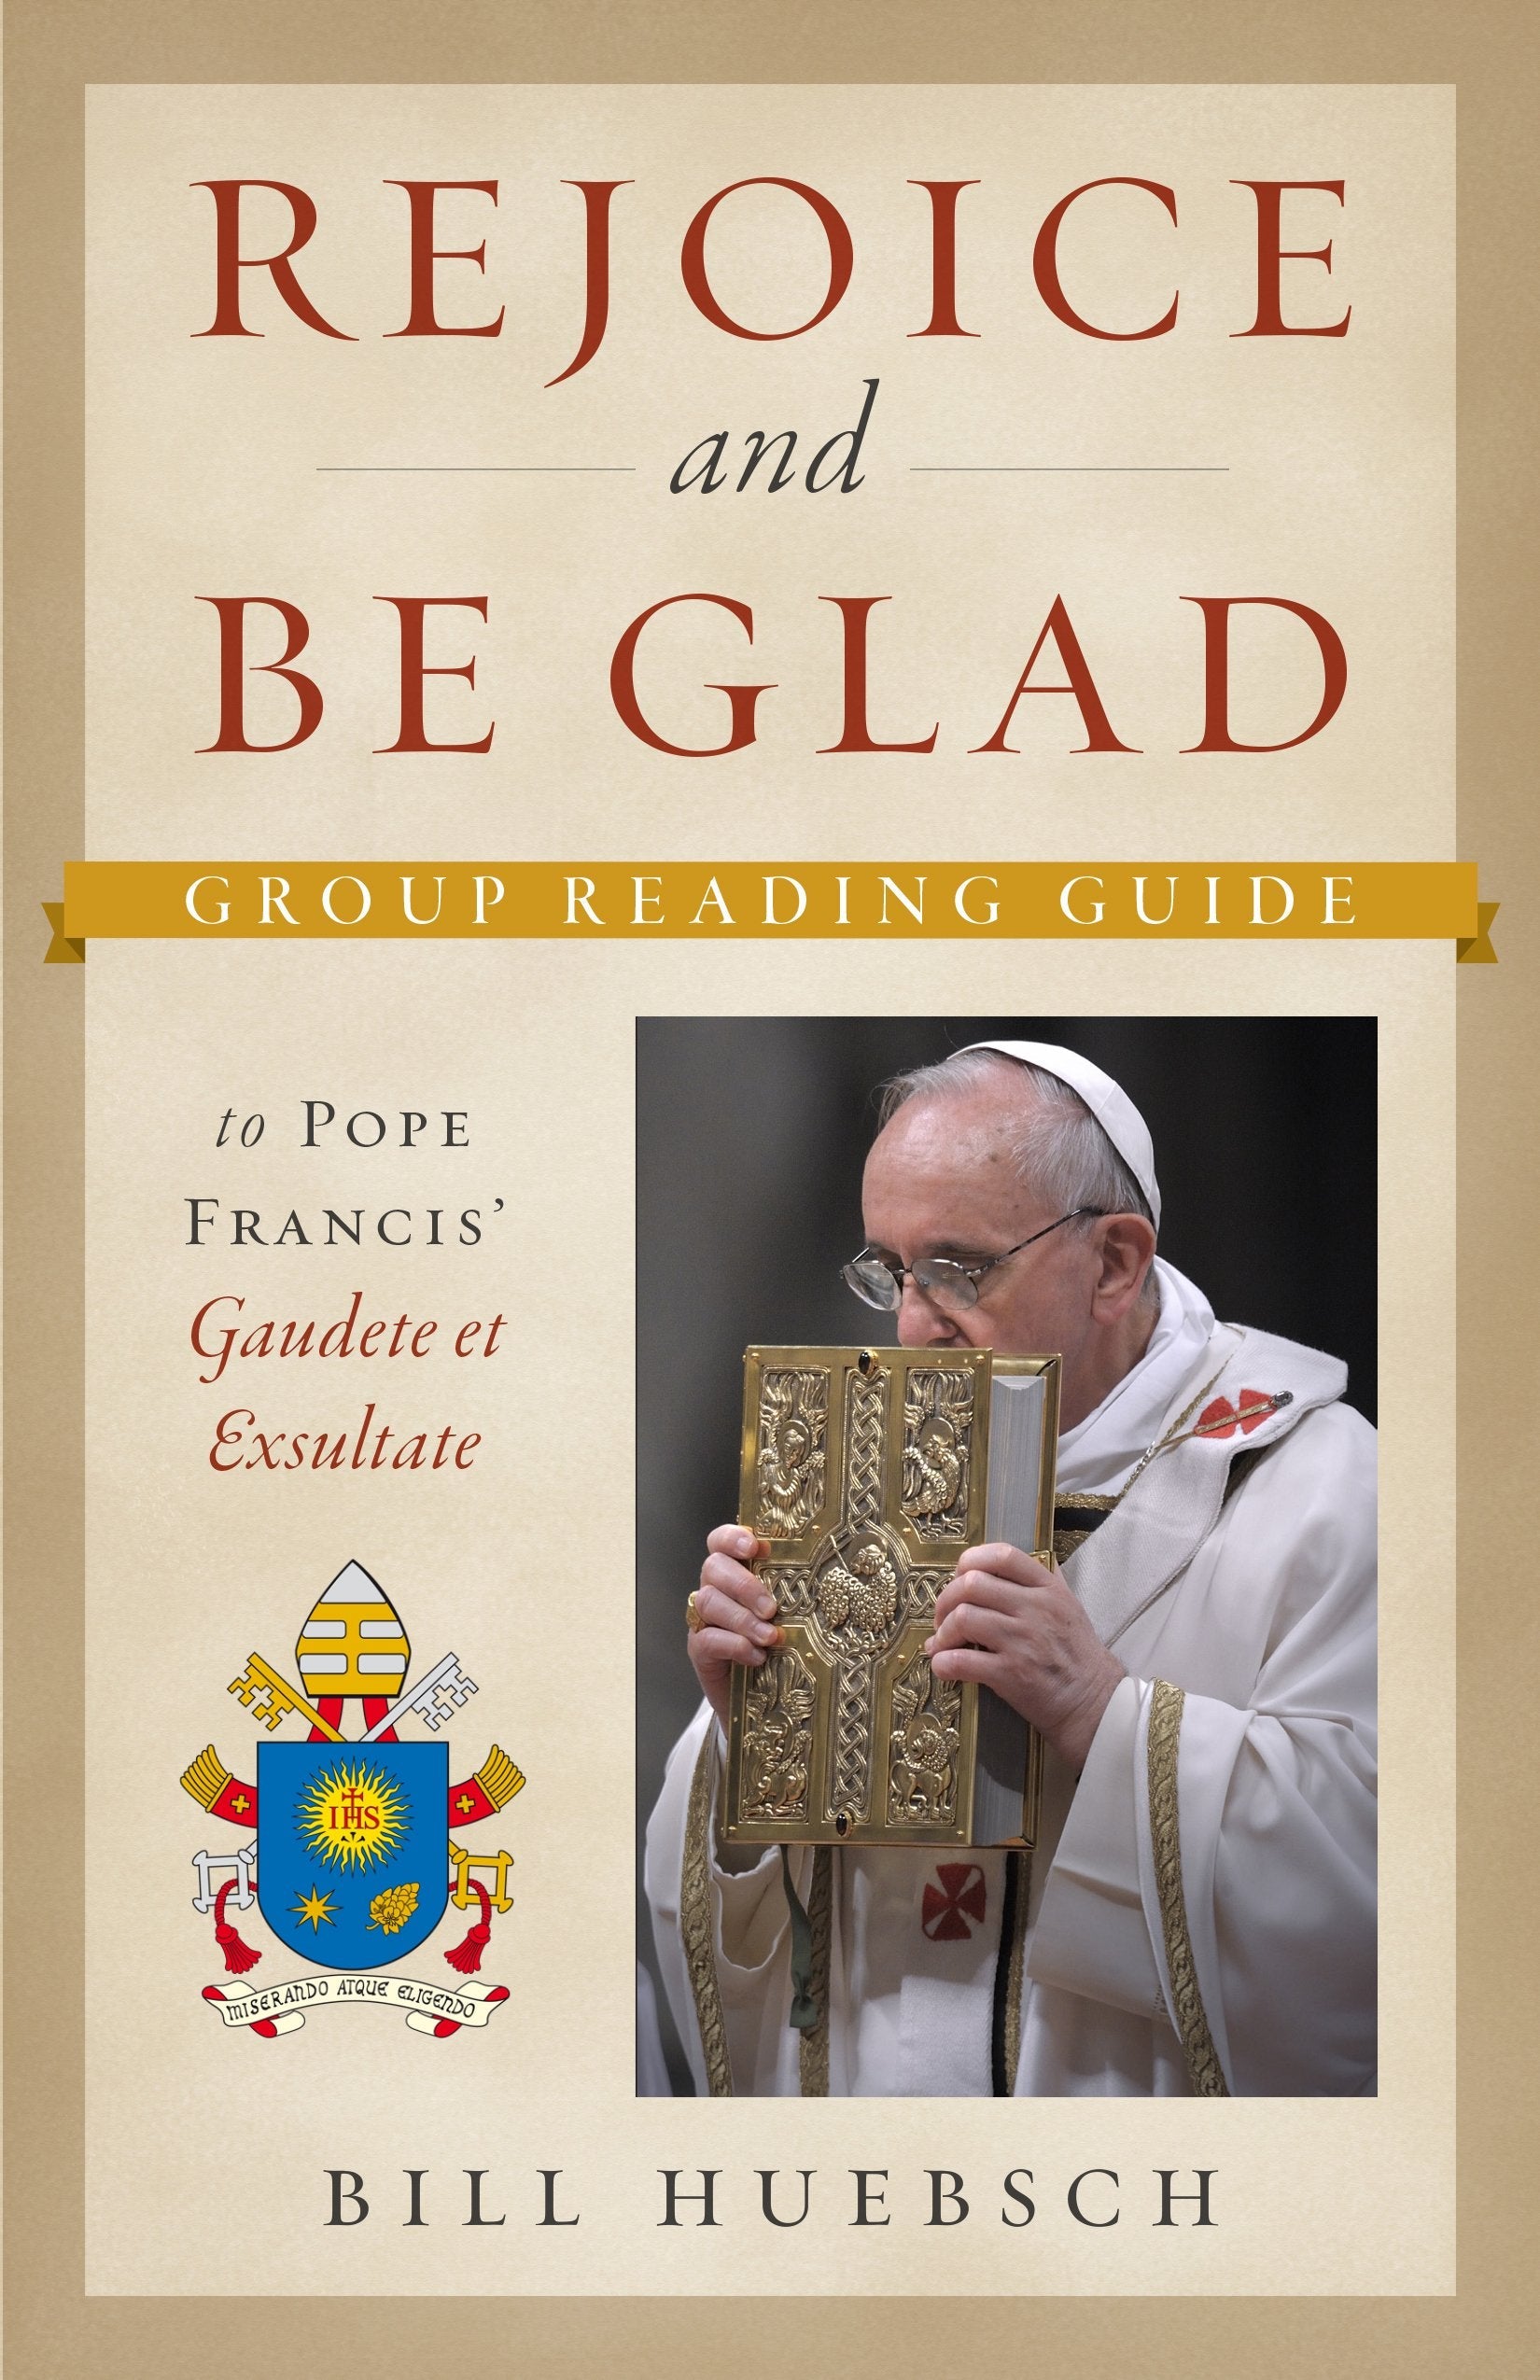 New from Pope Francis: Gaudete et Exsultate